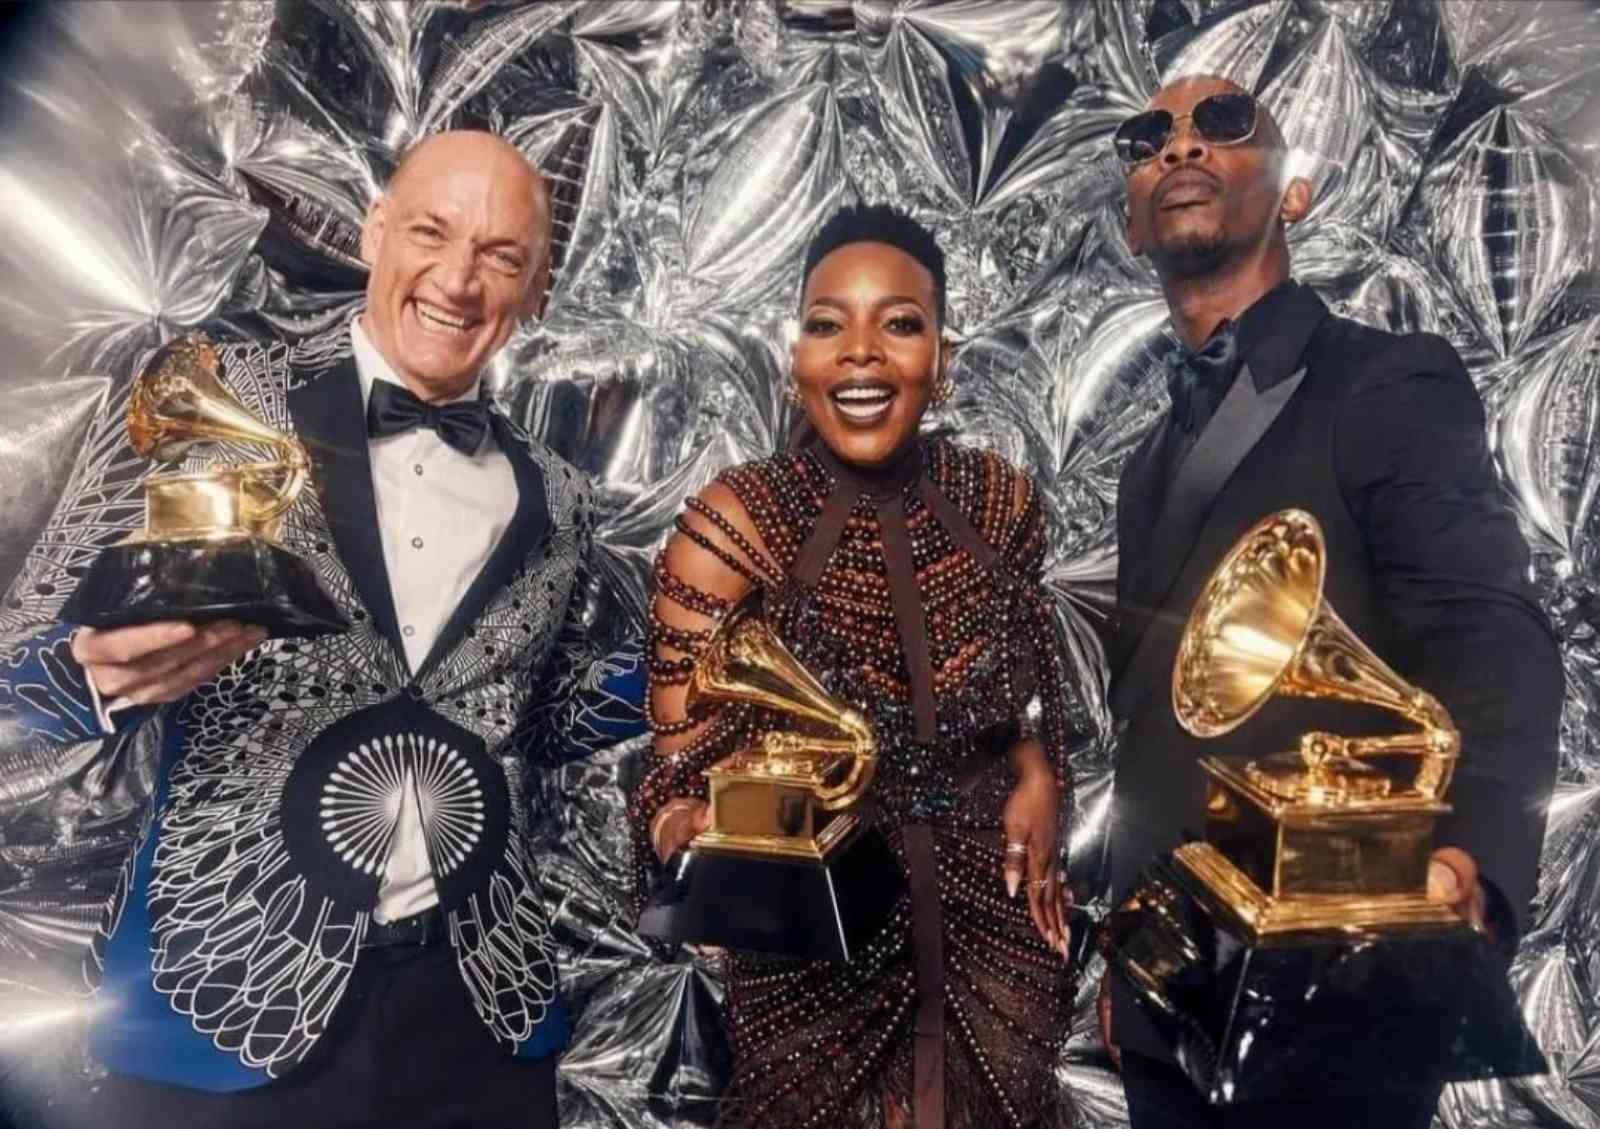 Zakes Bantwini & Nomcebo Zikode Wins first Grammy Awards for Best Global Music Performance Category